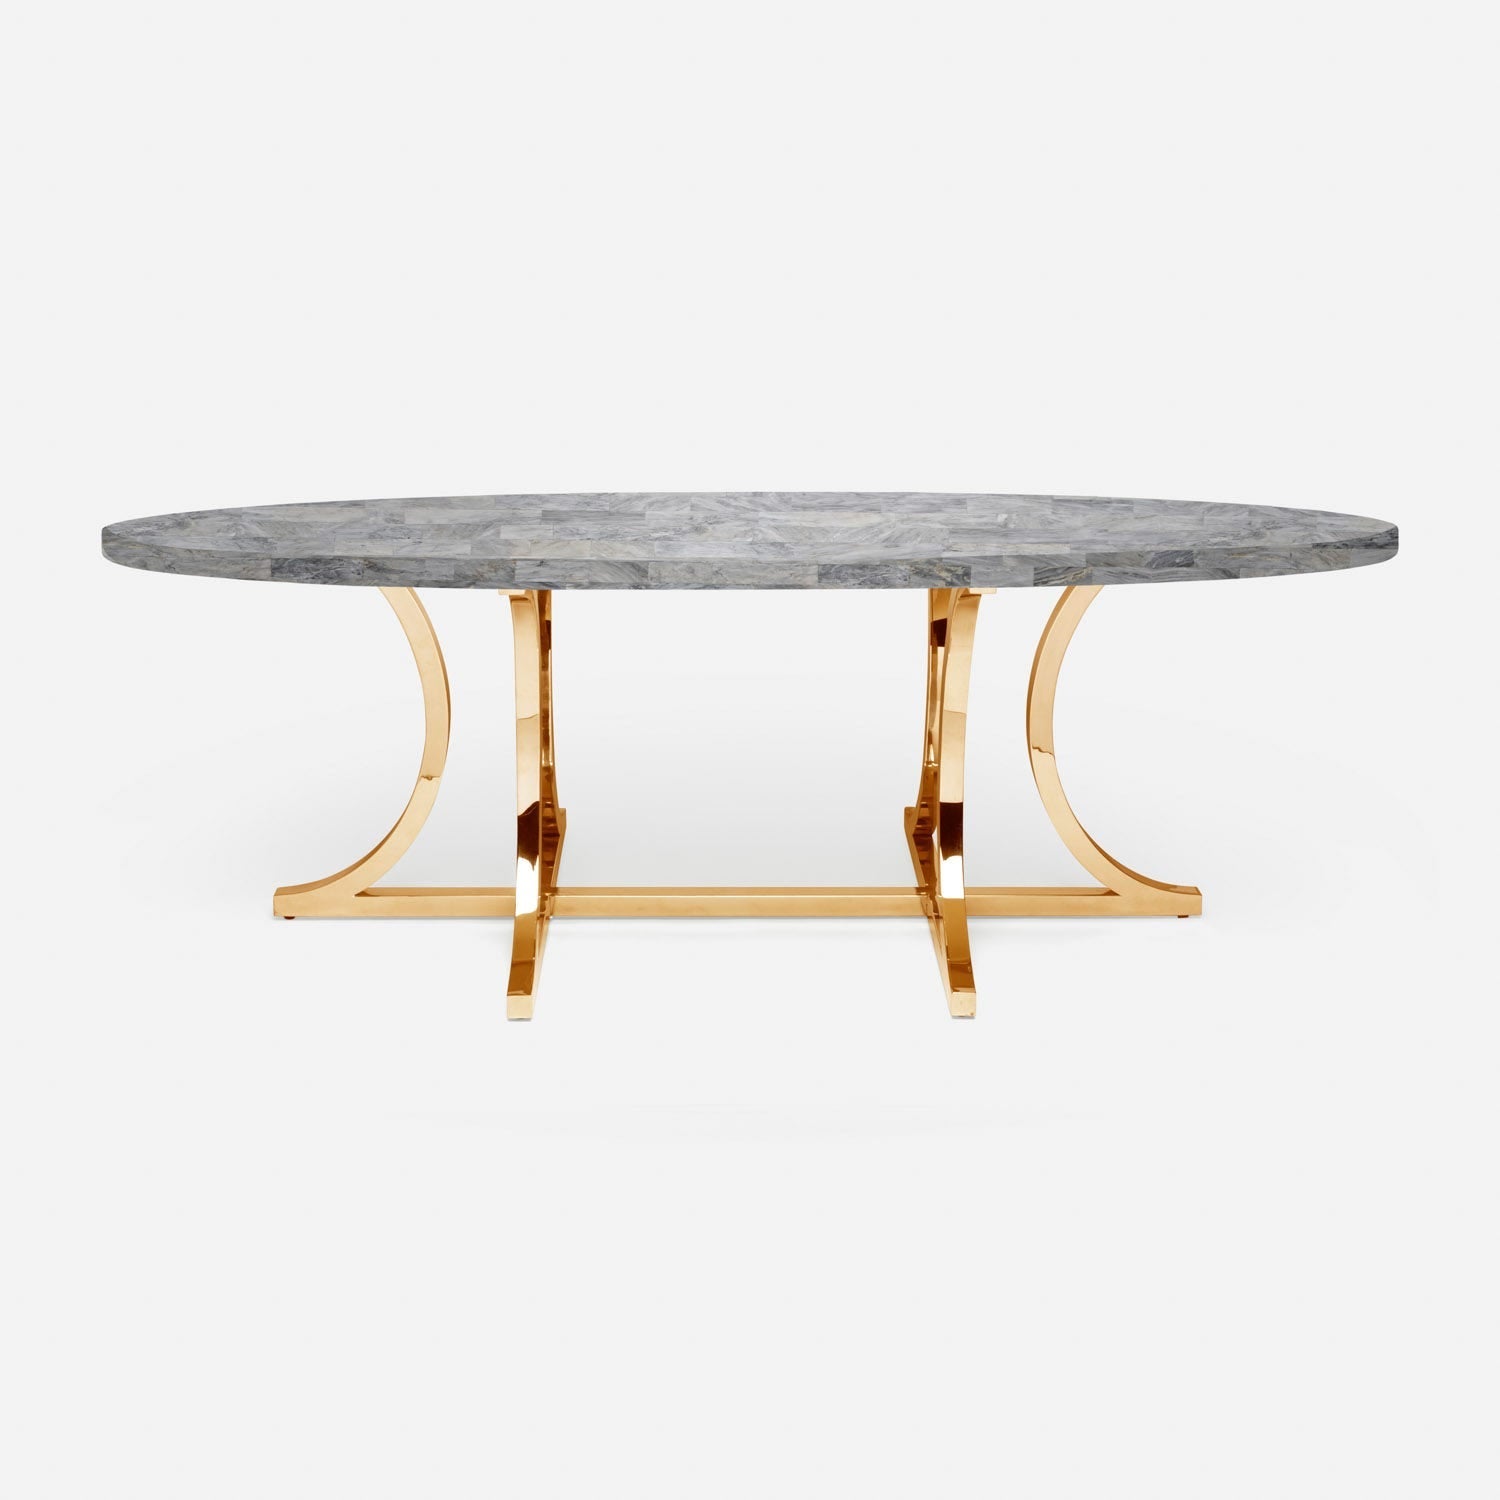 Made Goods Leighton 72" x 42" x 30" Polished Gold Steel Dinning Table With Oval Gray Romblon Stone Table Top